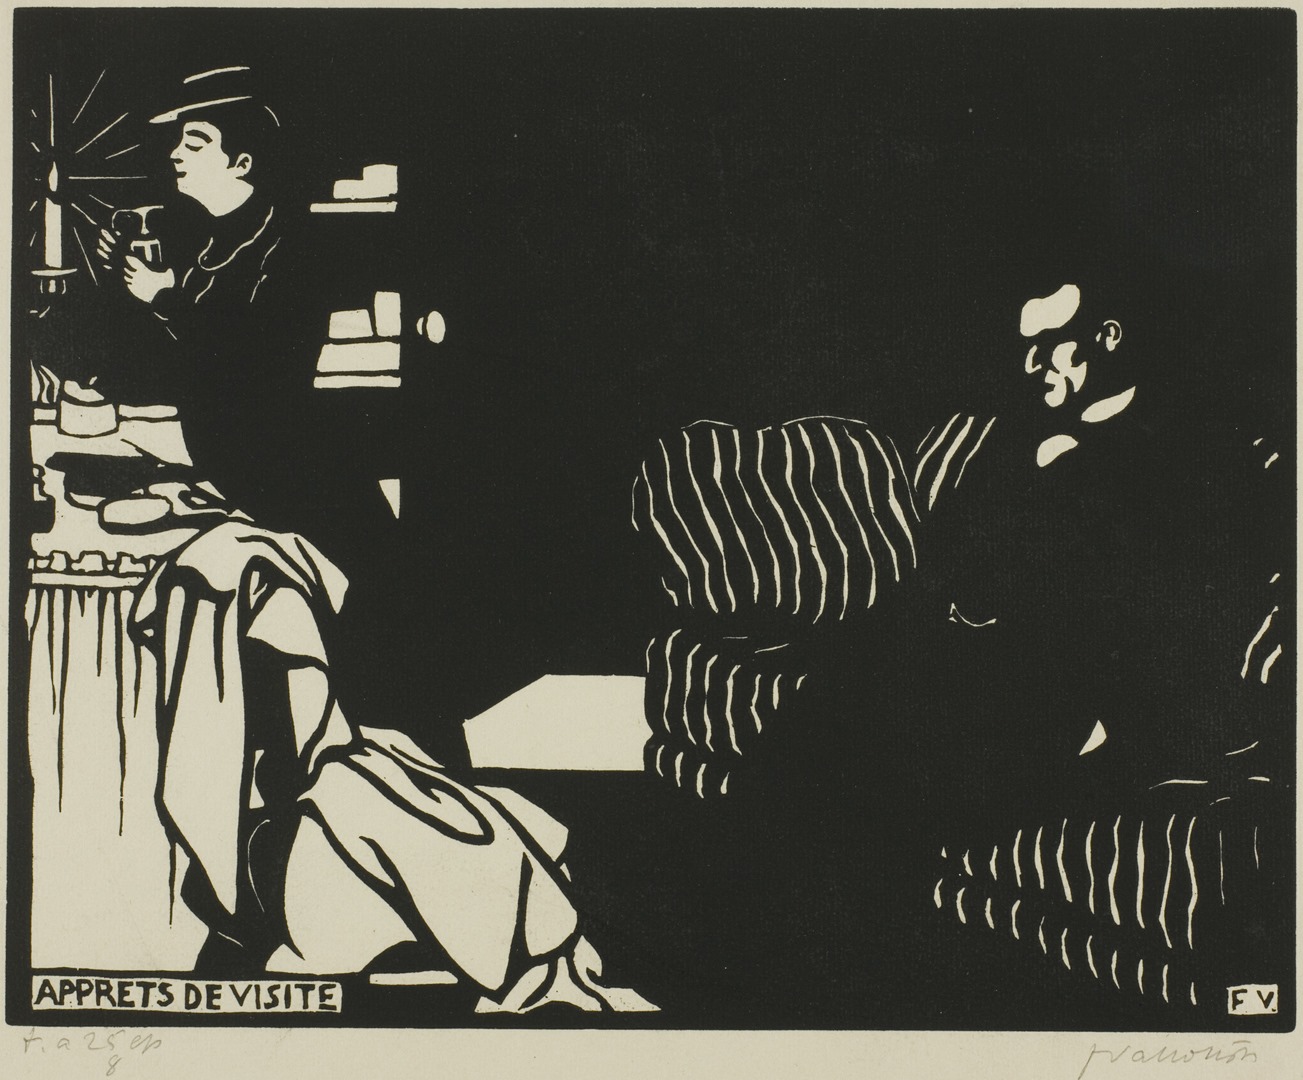 3. Felix Vallotton, Getting Ready for a Visit. A black and cream landscape print of two contrasting figures set at either end of the work. At left a woman is turned in profile spaying perfume on herself in front of a bright candle. Her face and hands are cream as well as the details of her black hat and dress. She stands at a cream skirted dressing table strewn with a brush, mirror, and other items. A discarded cream garment lays over a chair in the foreground. Across the black expanse of the background, a man sits on a cream striped black sofa at far right. Most of his figure is black. His face, collar and shirt front, watch chain and a bit of his hand are discernable in cream highlights. His head is slightly bowed, and he appears to grimace. His hand is shoved in his pocket. At lower left a cream box with the black words “Apprets De Visite” appears. At lower right are the black initials “FV” in a black box. The artist’s signature is in pencil at lower right.